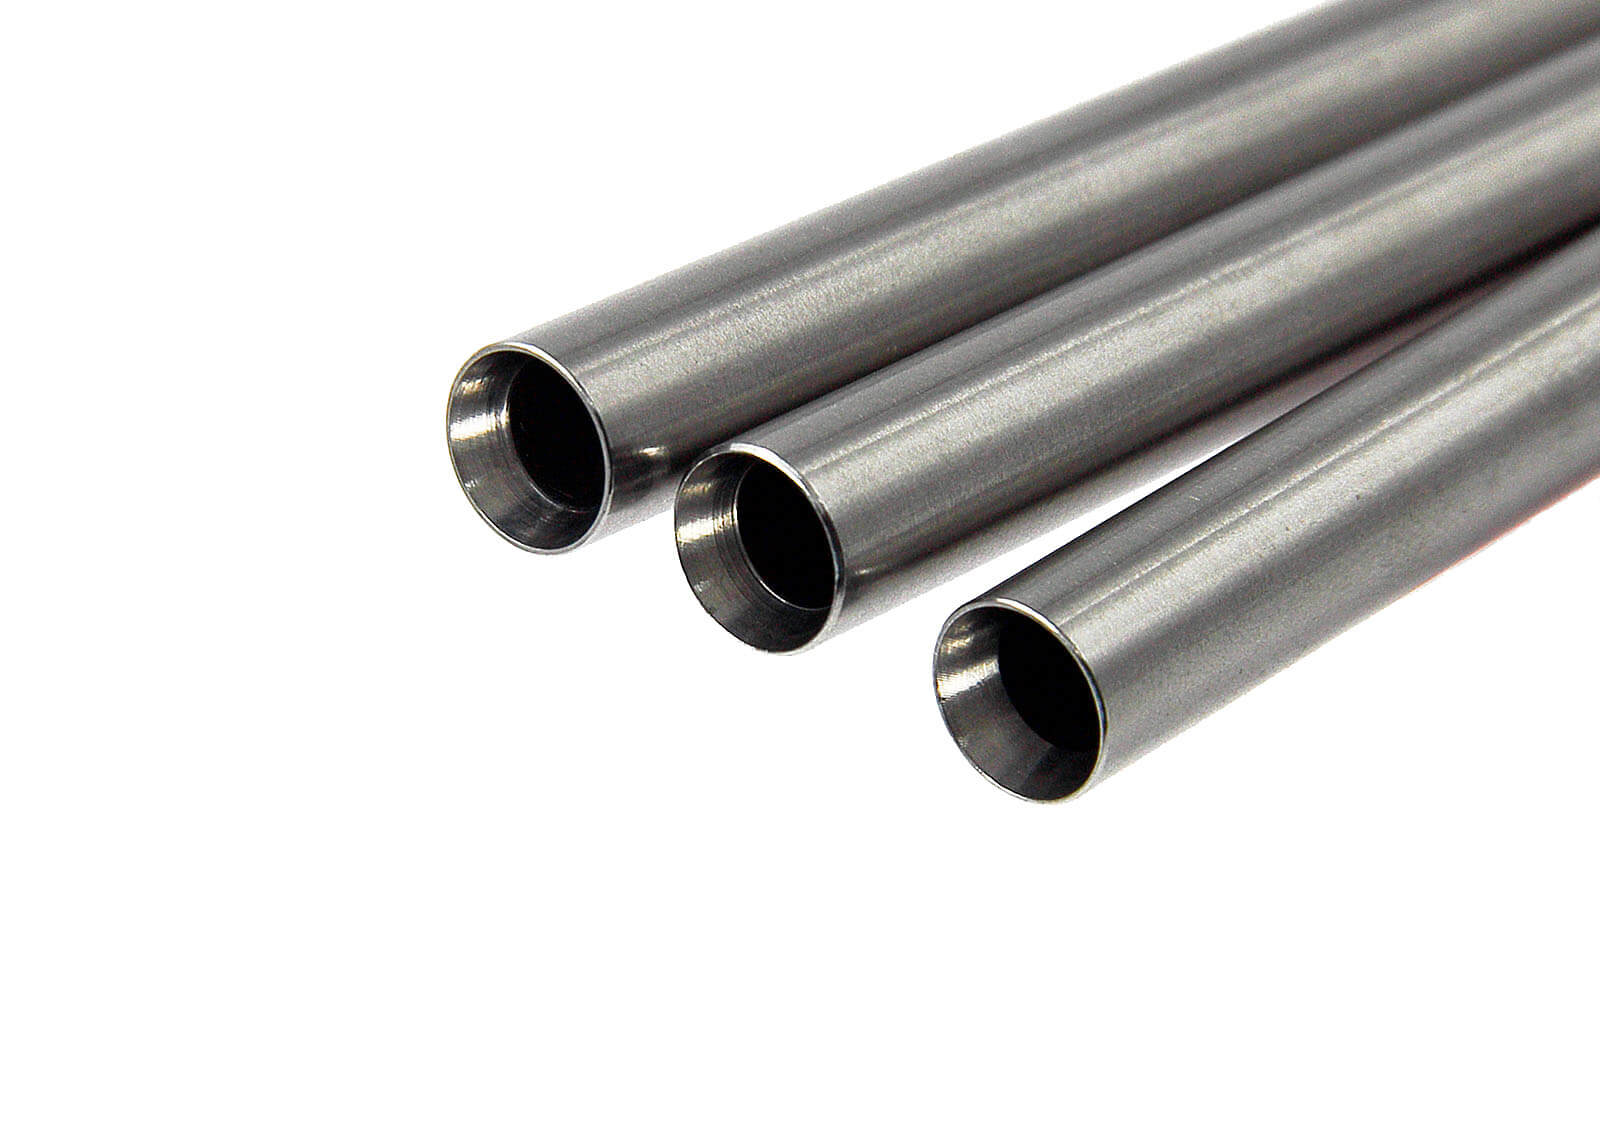 Stainless Steel 6.03mm Precision GBB Inner Barrel 136mm - Modify Airsoft Parts